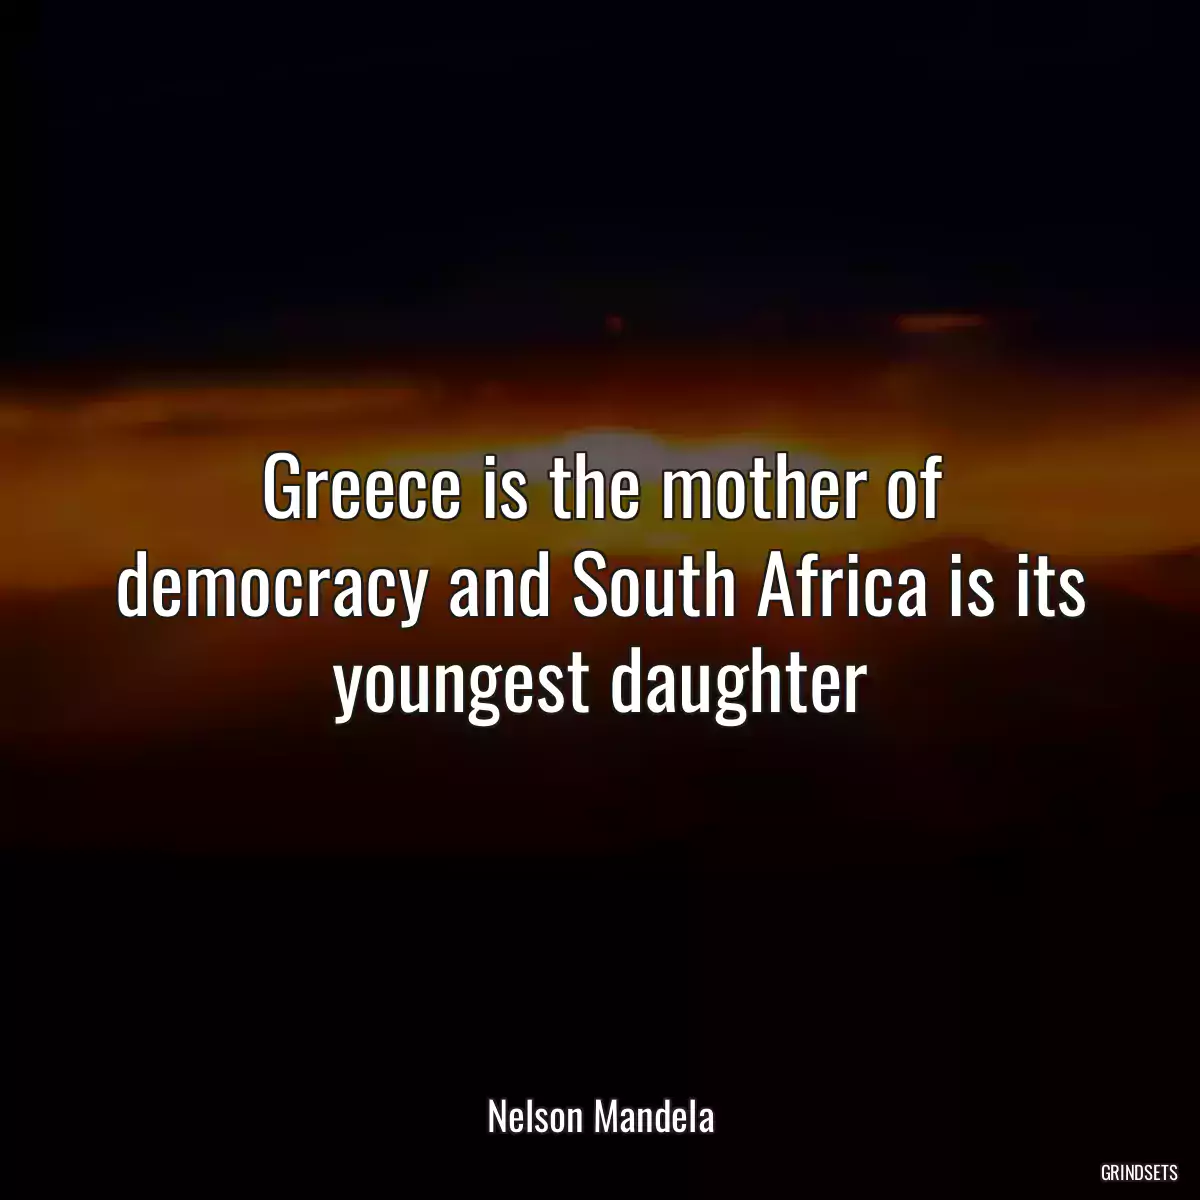 Greece is the mother of democracy and South Africa is its youngest daughter